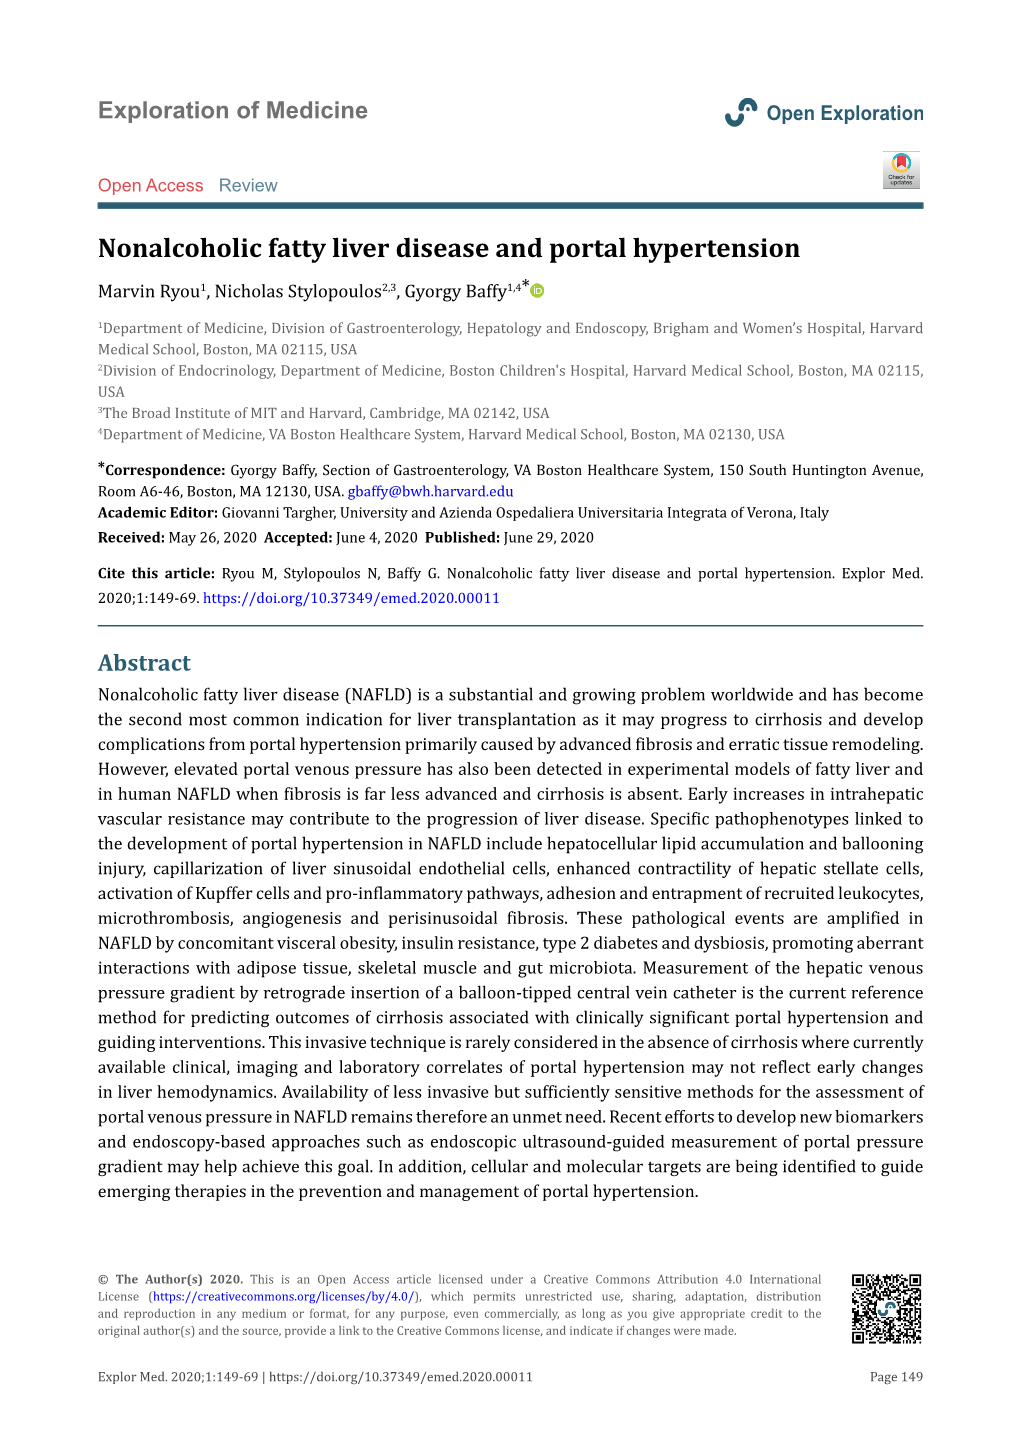 Nonalcoholic Fatty Liver Disease and Portal Hypertension Marvin Ryou1, Nicholas Stylopoulos2,3, Gyorgy Baffy1,4*